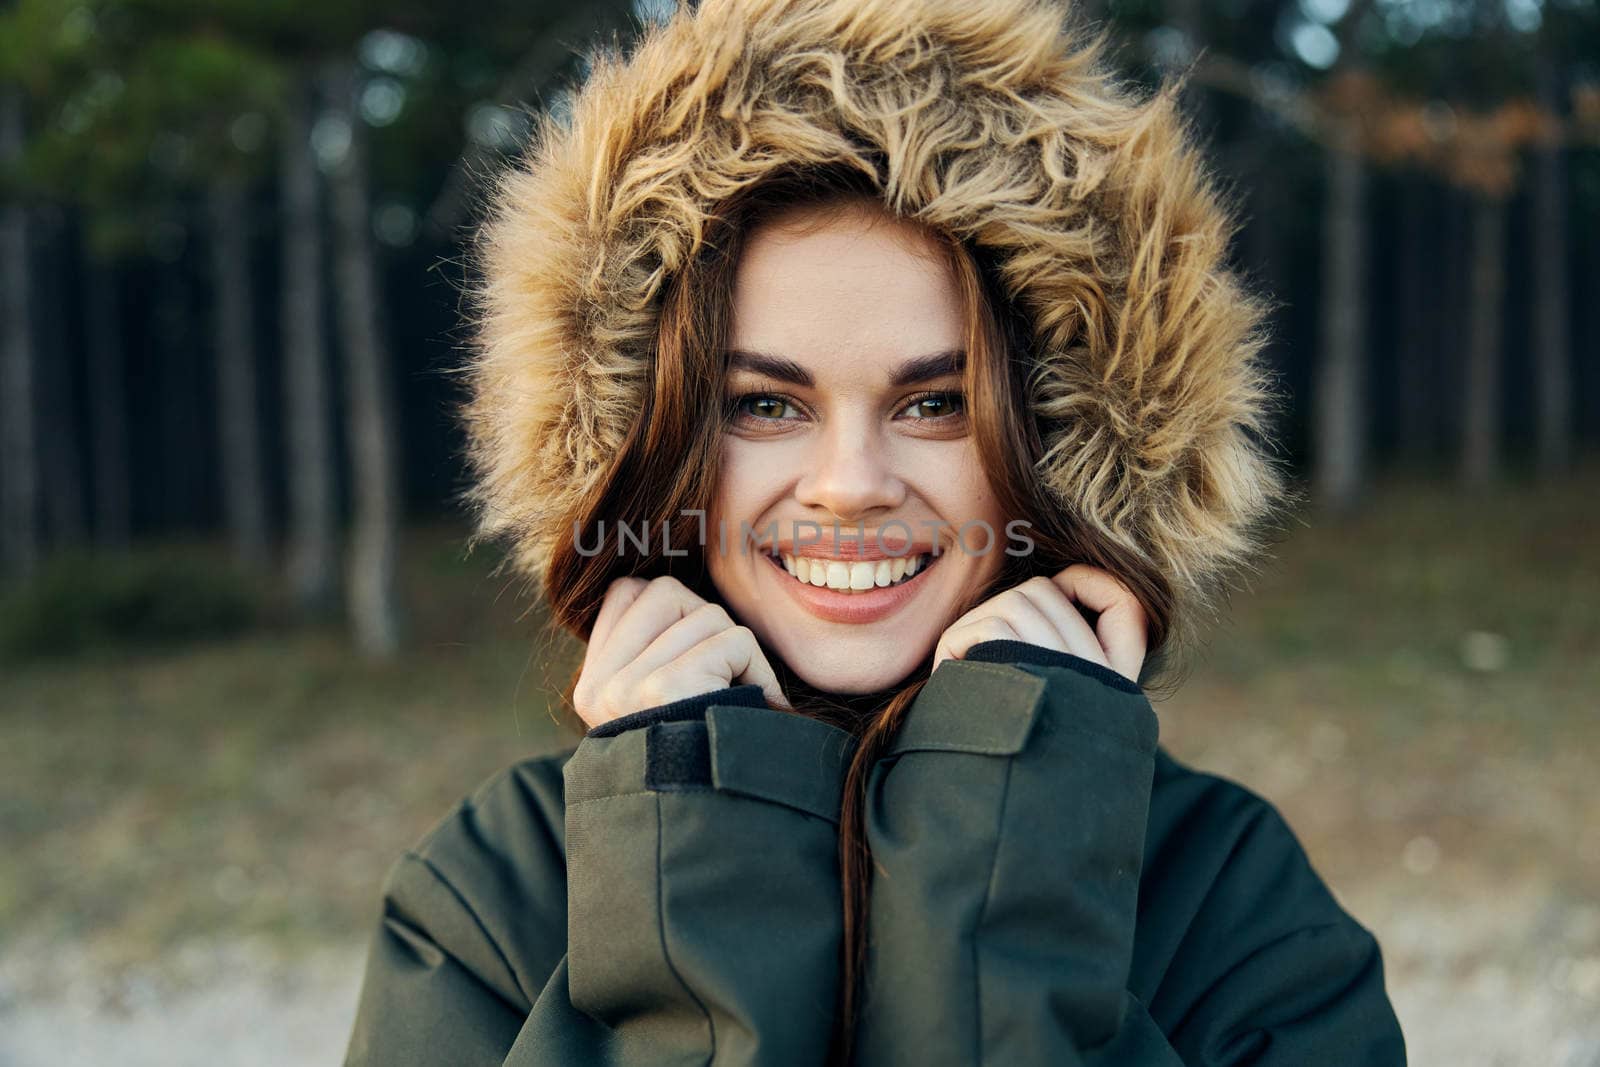 Smiling woman with a hood on her head in a warm jacket close-up nature on a forest background. High quality photo